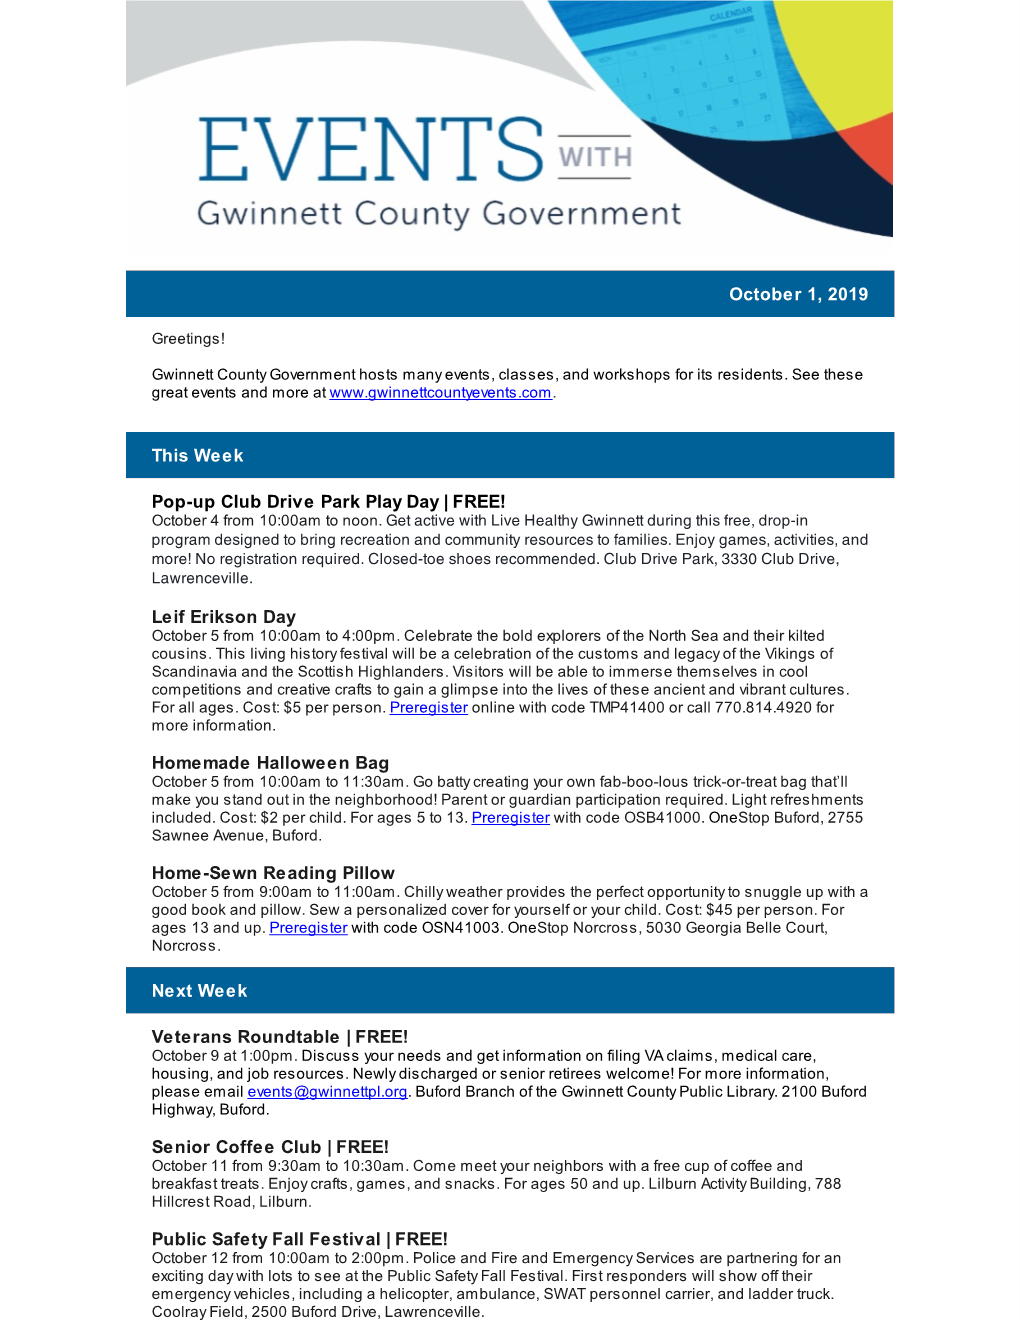 October 1, 2019 Events with Gwinnett